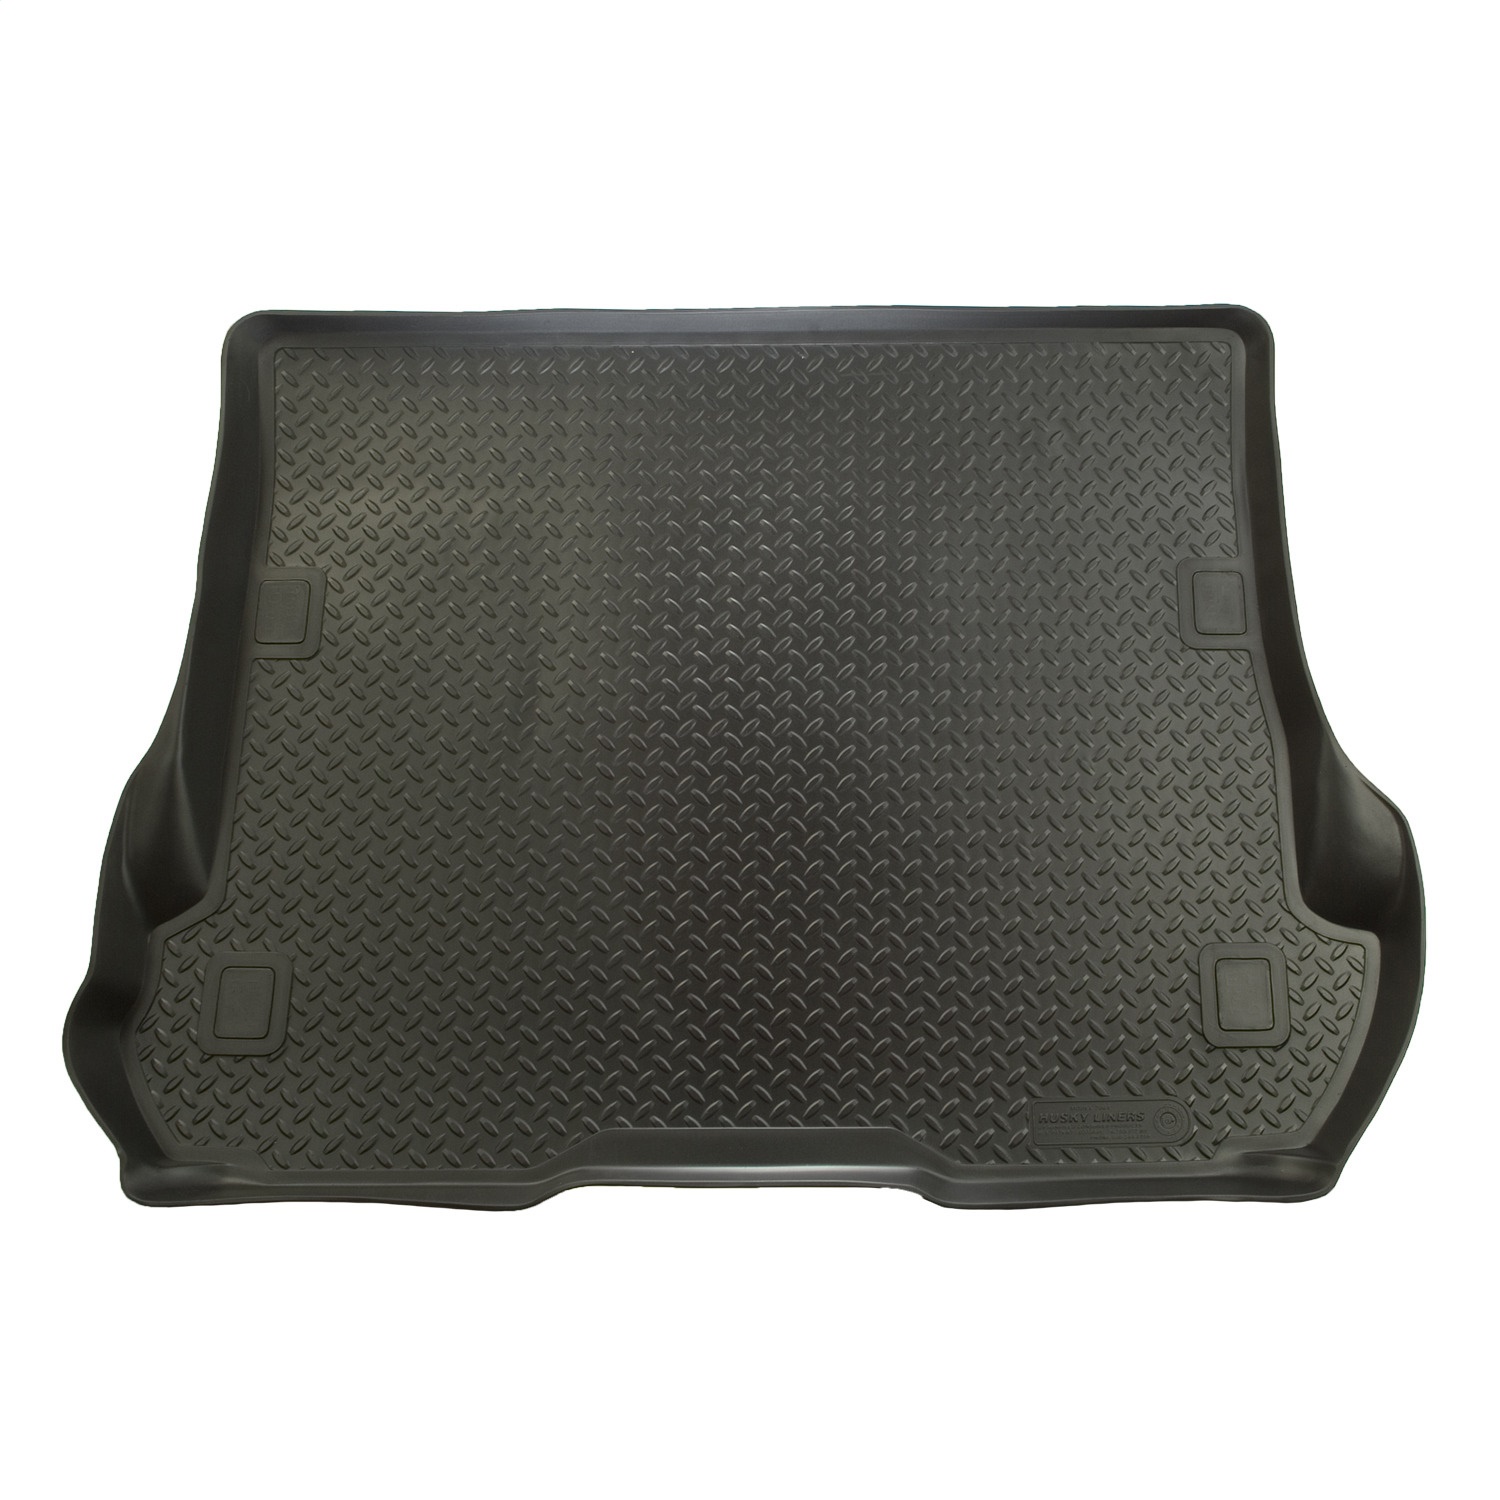 Husky Liners Husky Liners 24301 Classic Style; Cargo Liner Fits 01-07 MDX Pilot